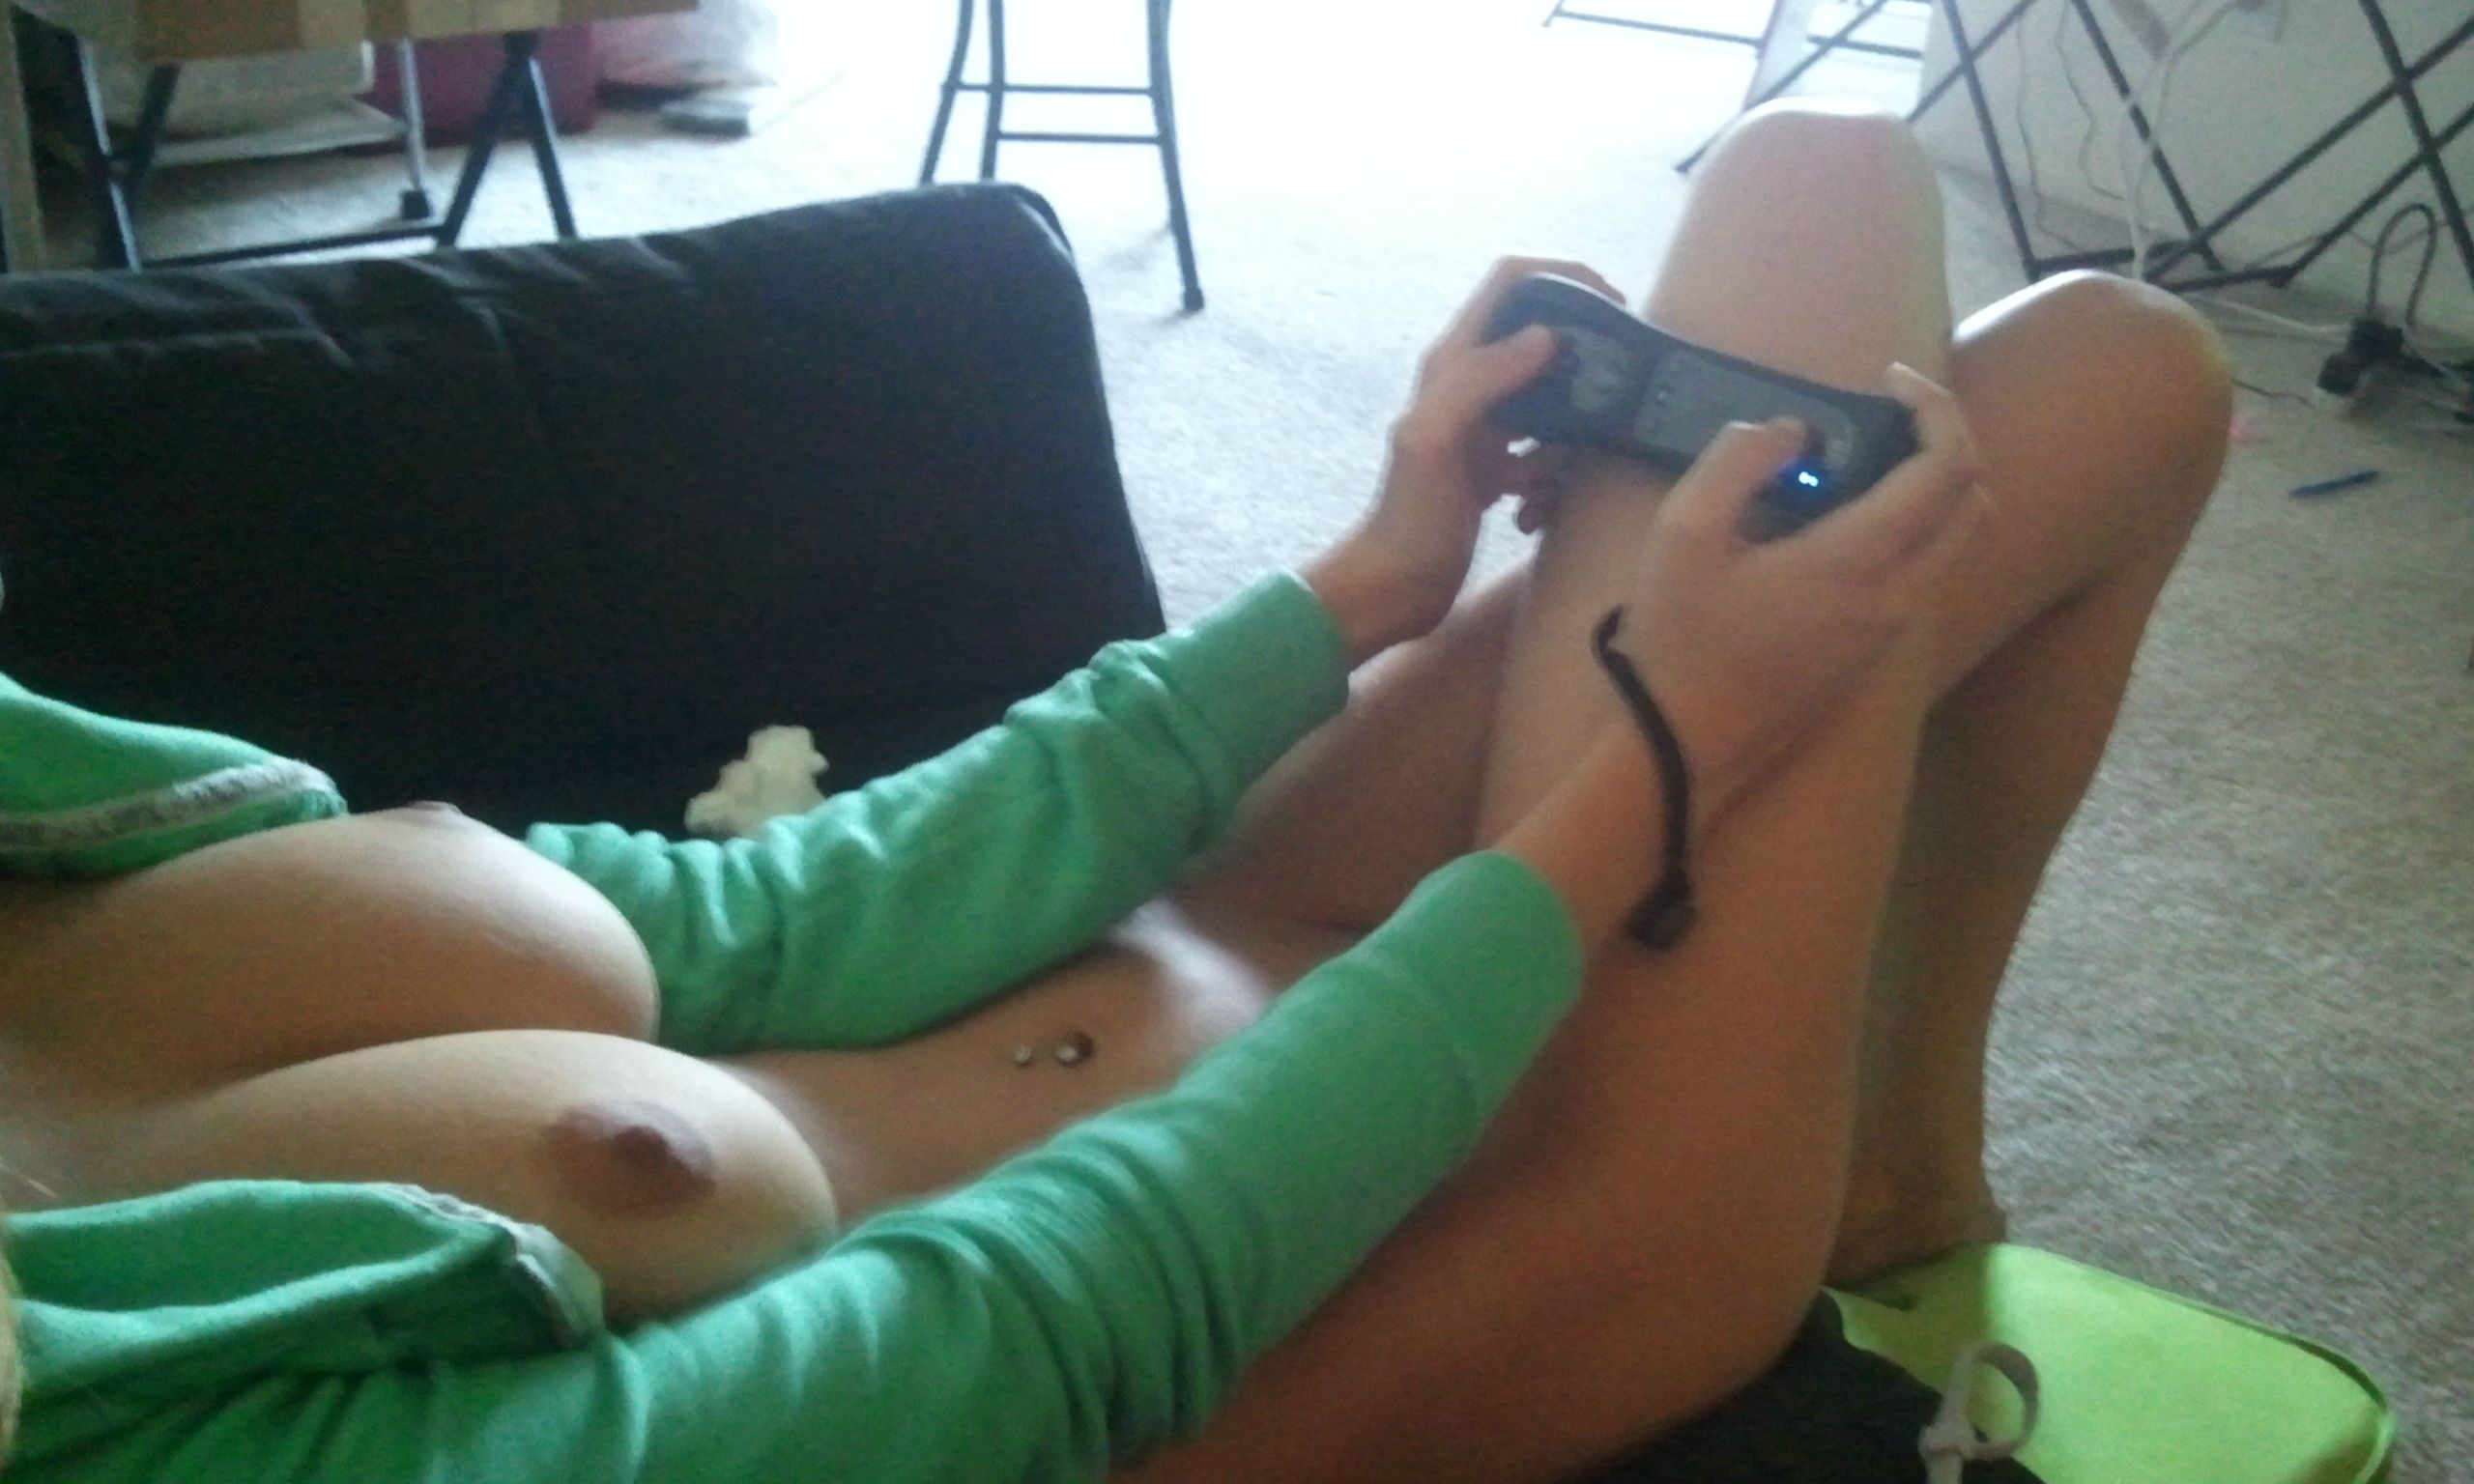 Wizard recommendet naked Chick plays wii